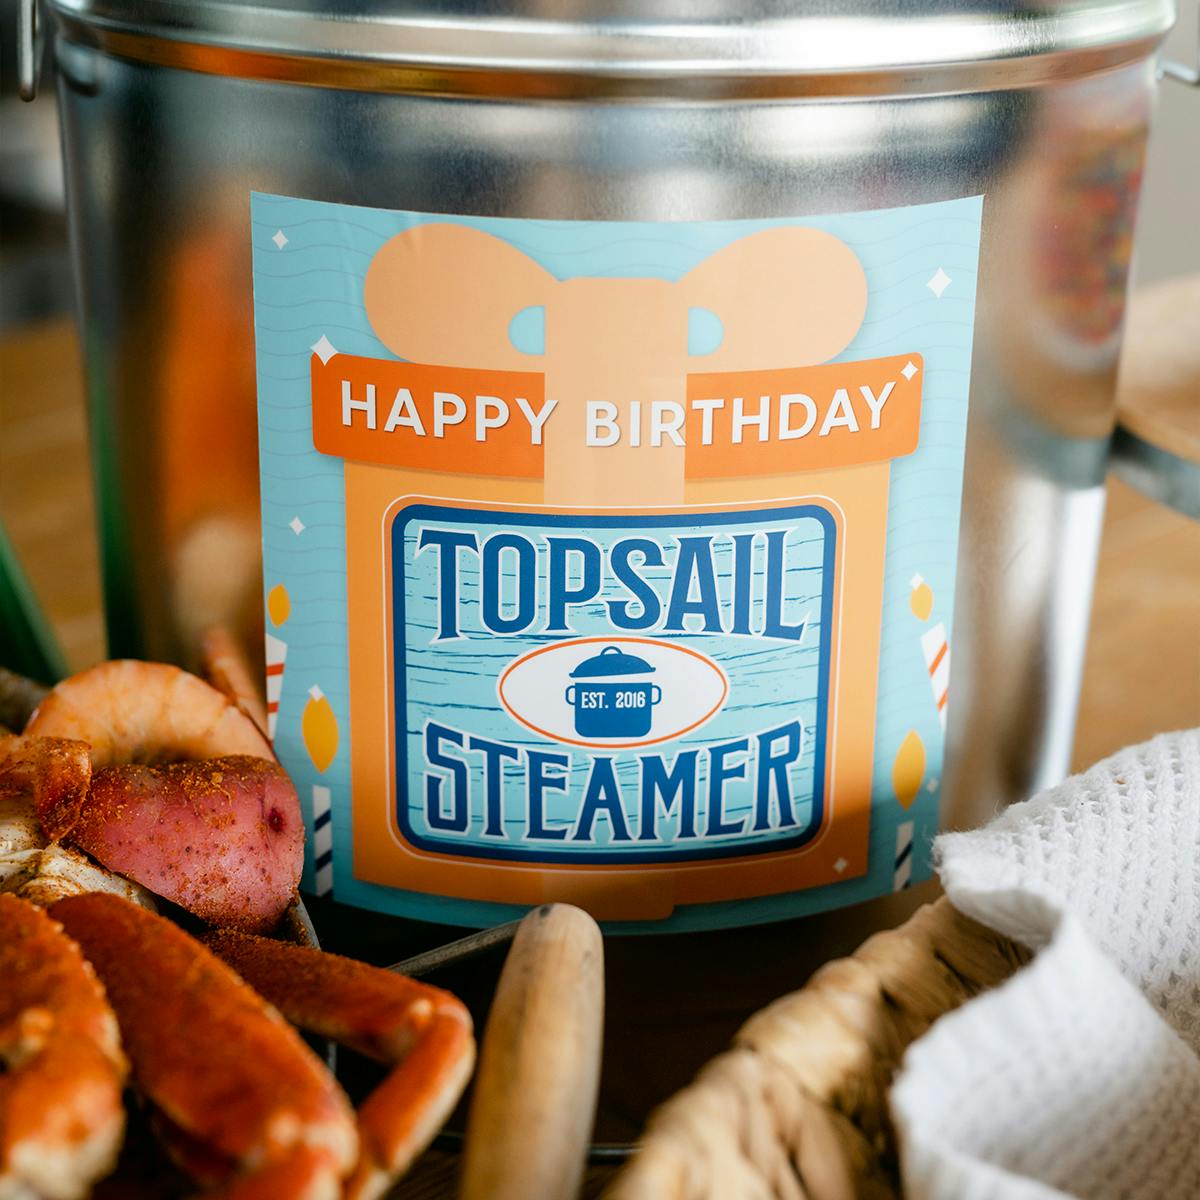 Full Steamer Pot Topsail SteamerStar ShipperStar Shippers have an  outstanding track record of providing a great Goldbelly experience—they  consistently